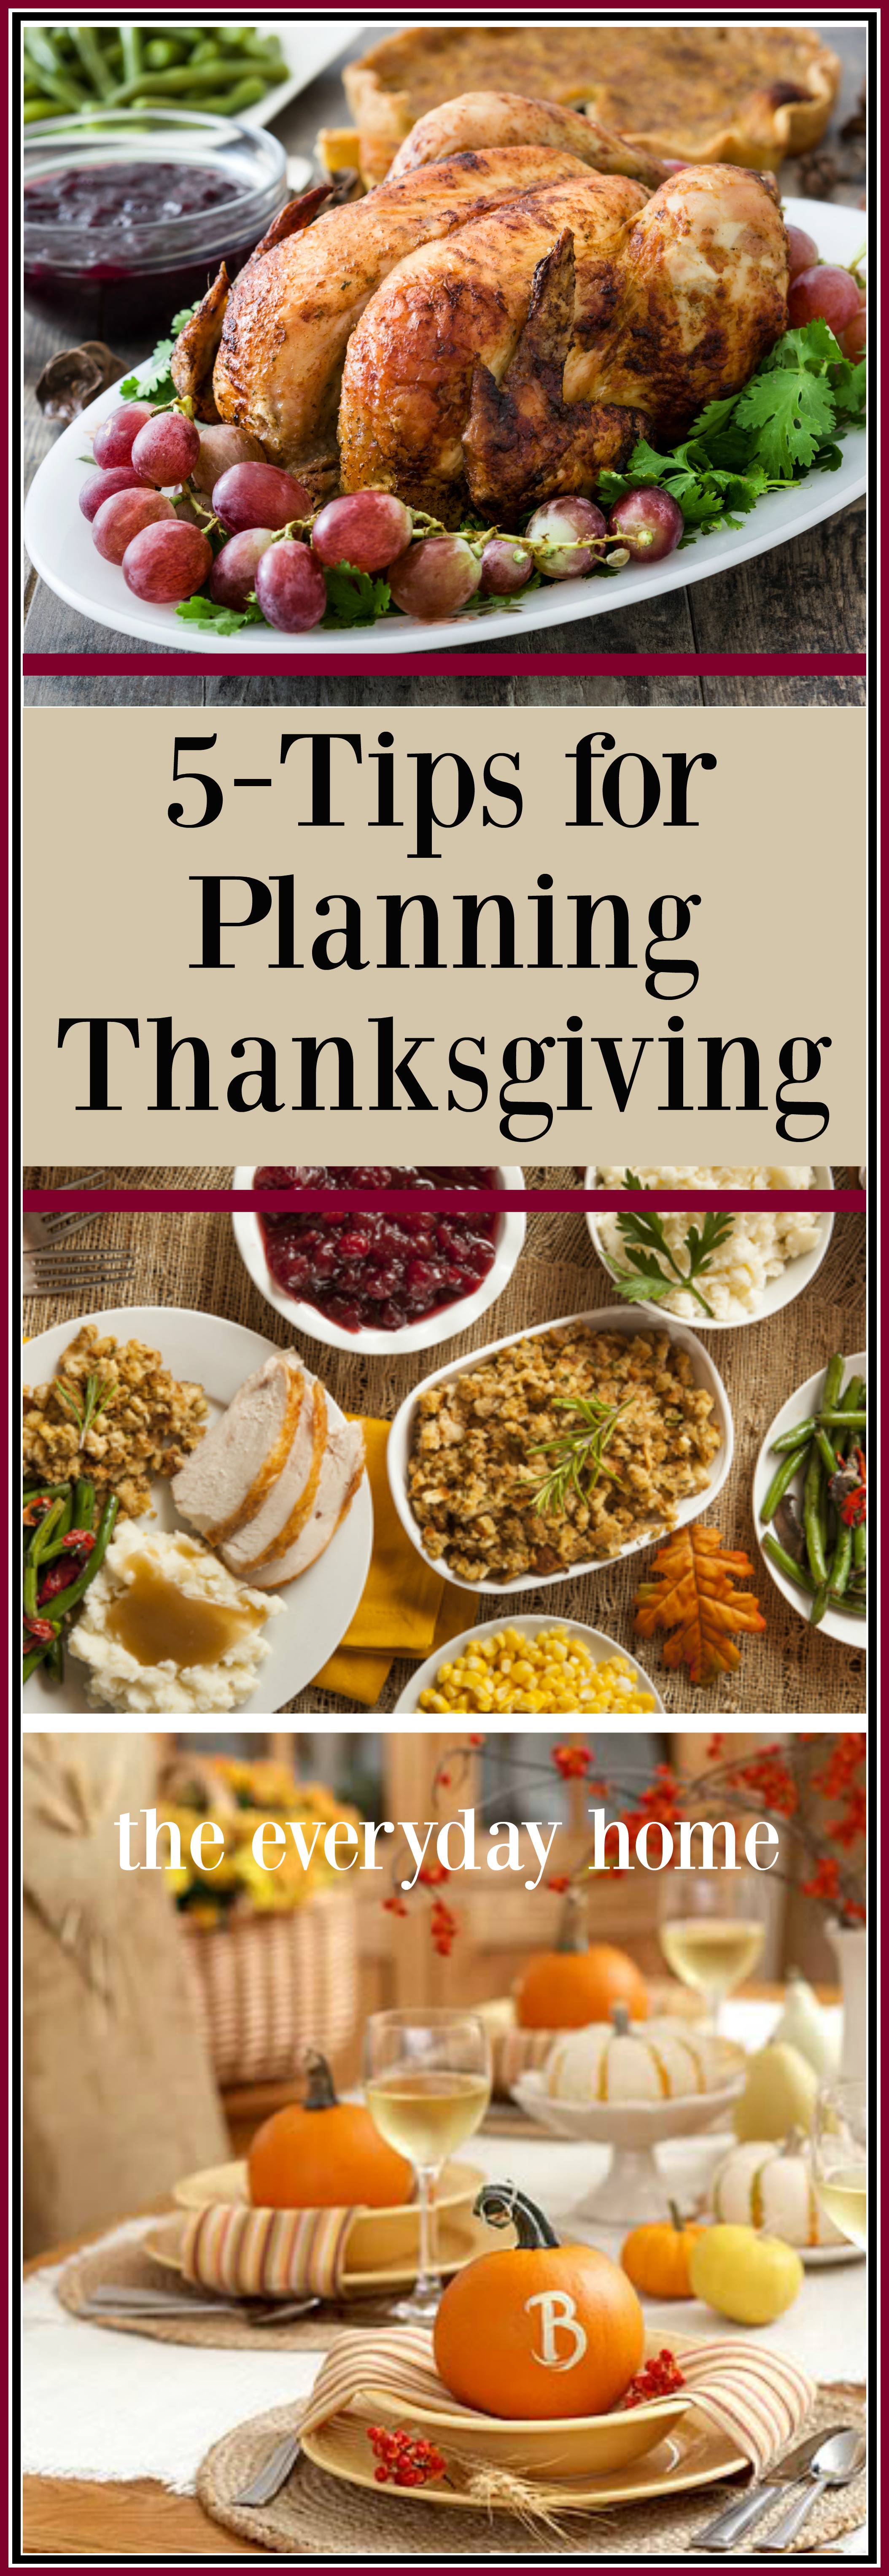 5-Tips for Planning a Successful Thanksgiving | The Everyday Home | www.everydayhomeblog.com